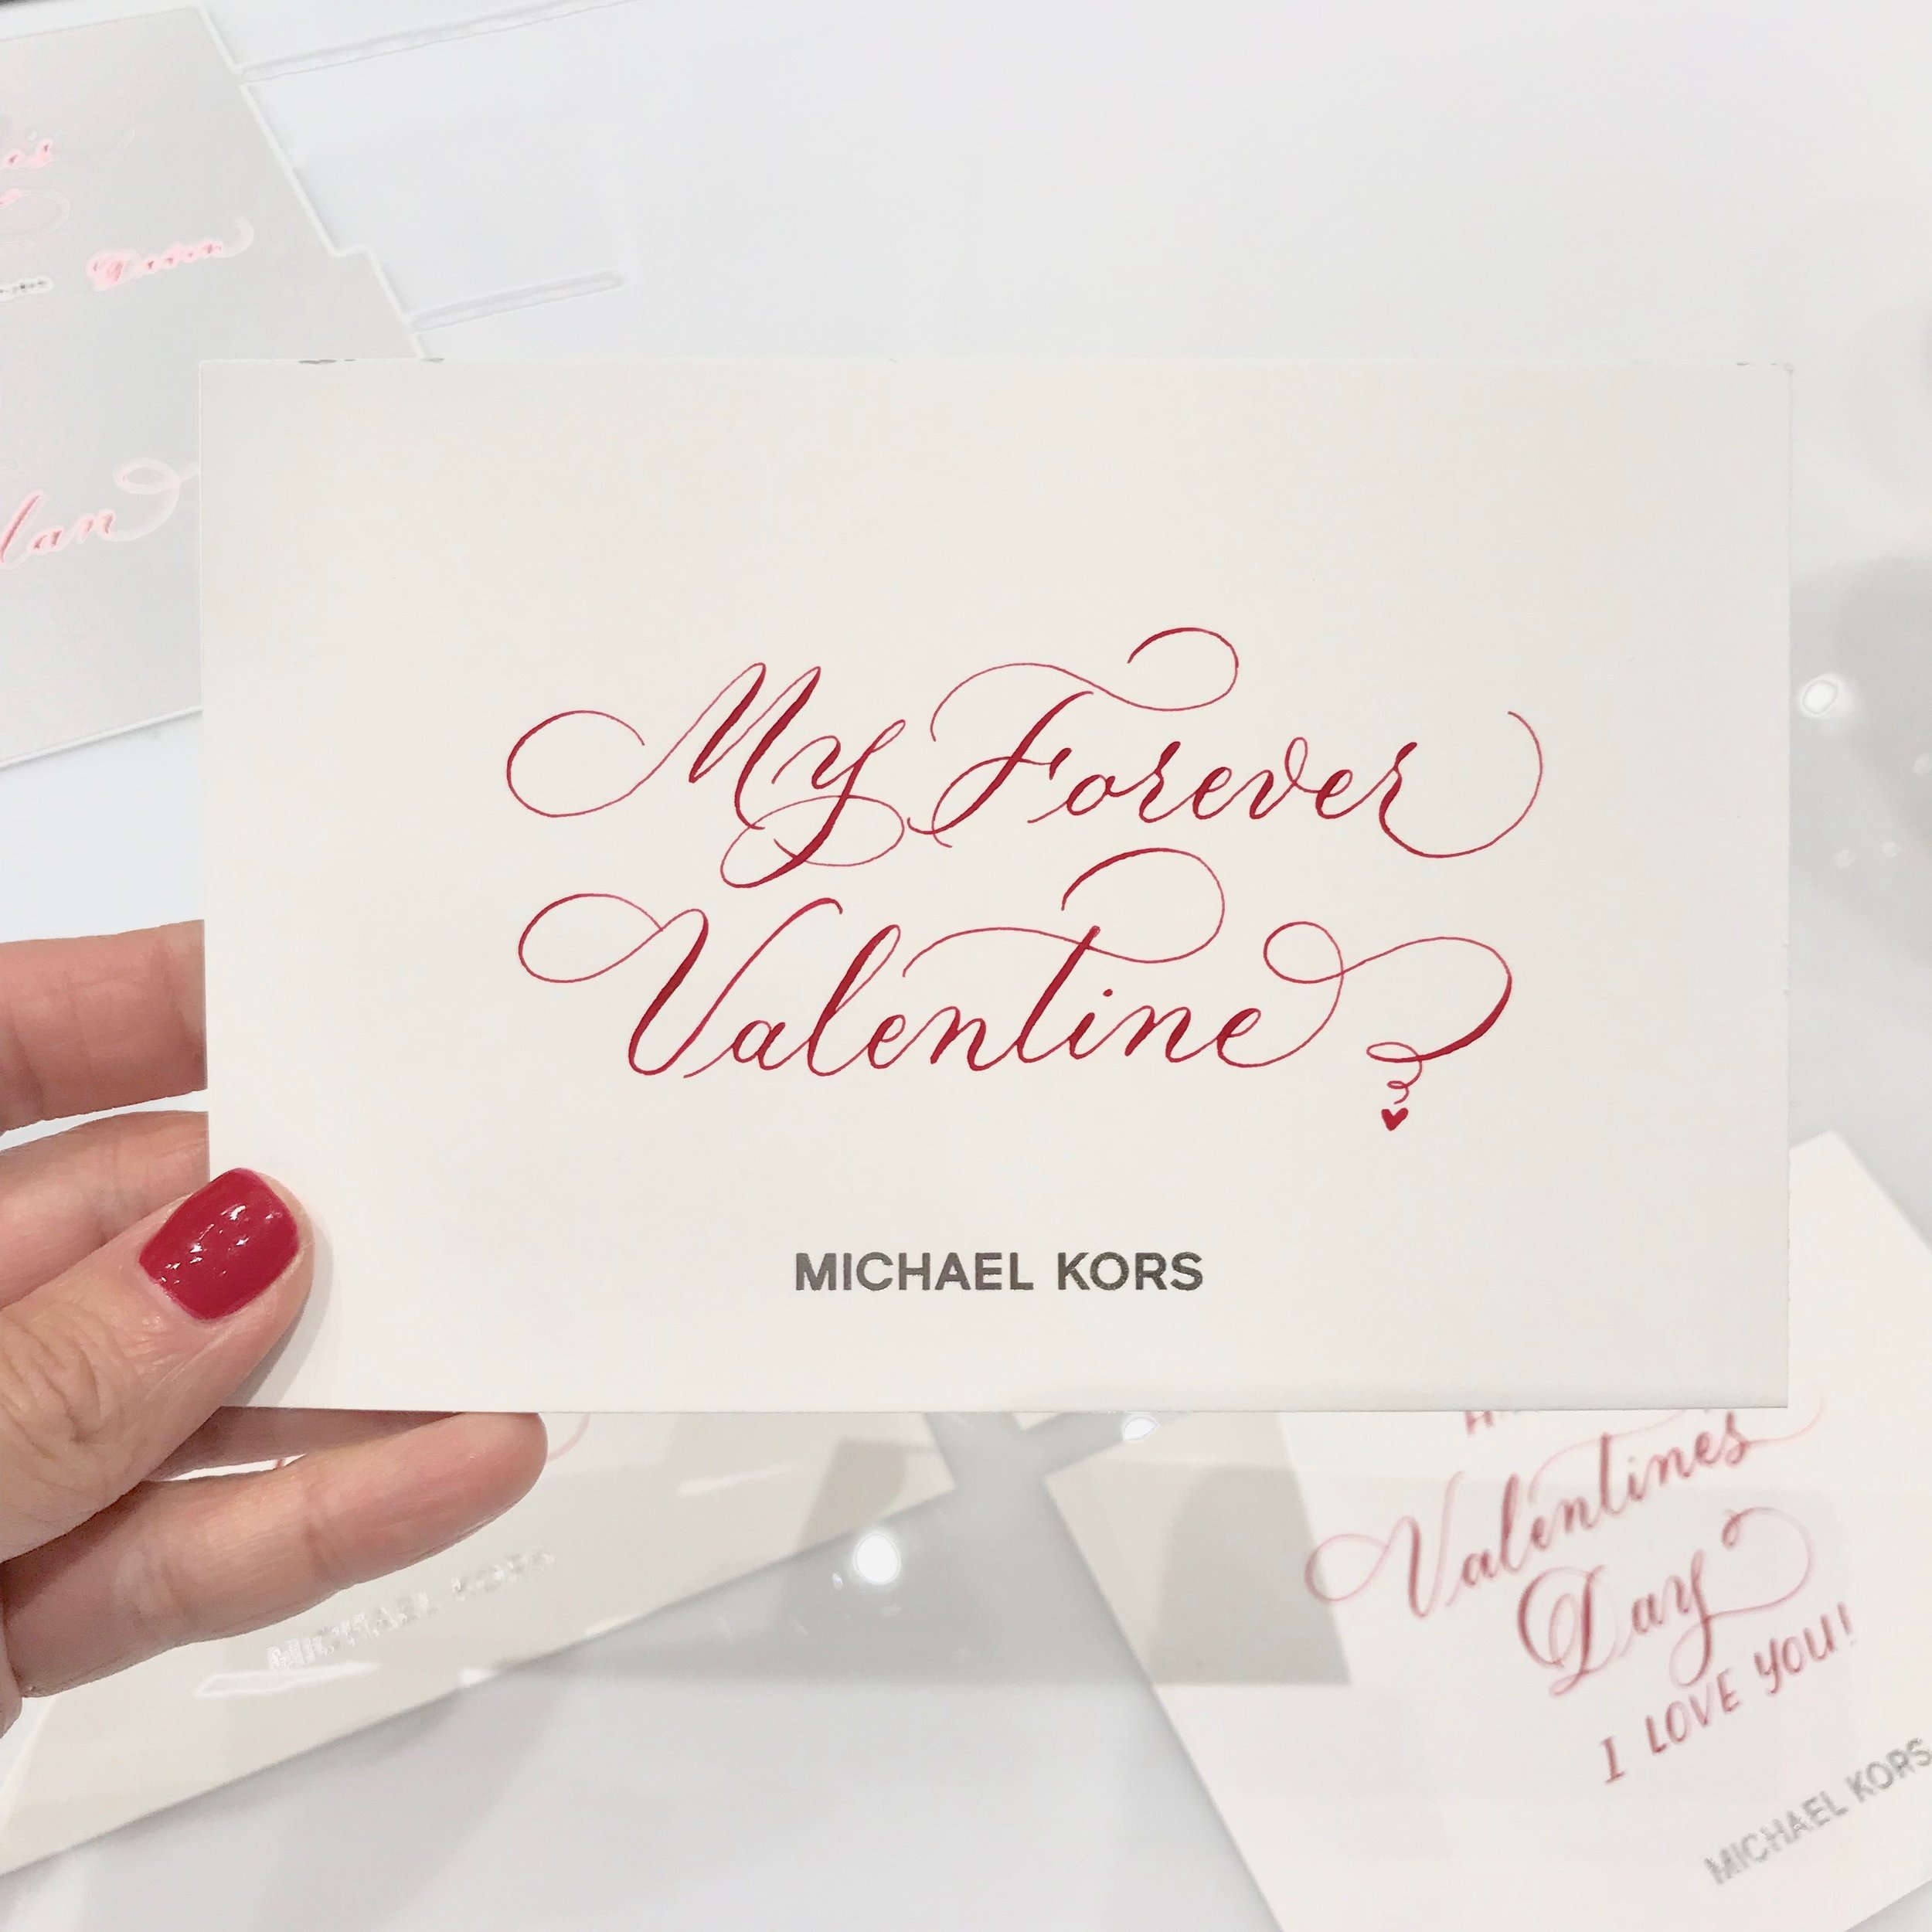 Valentine's Day cards - Michael Kors (Beverly Hills)